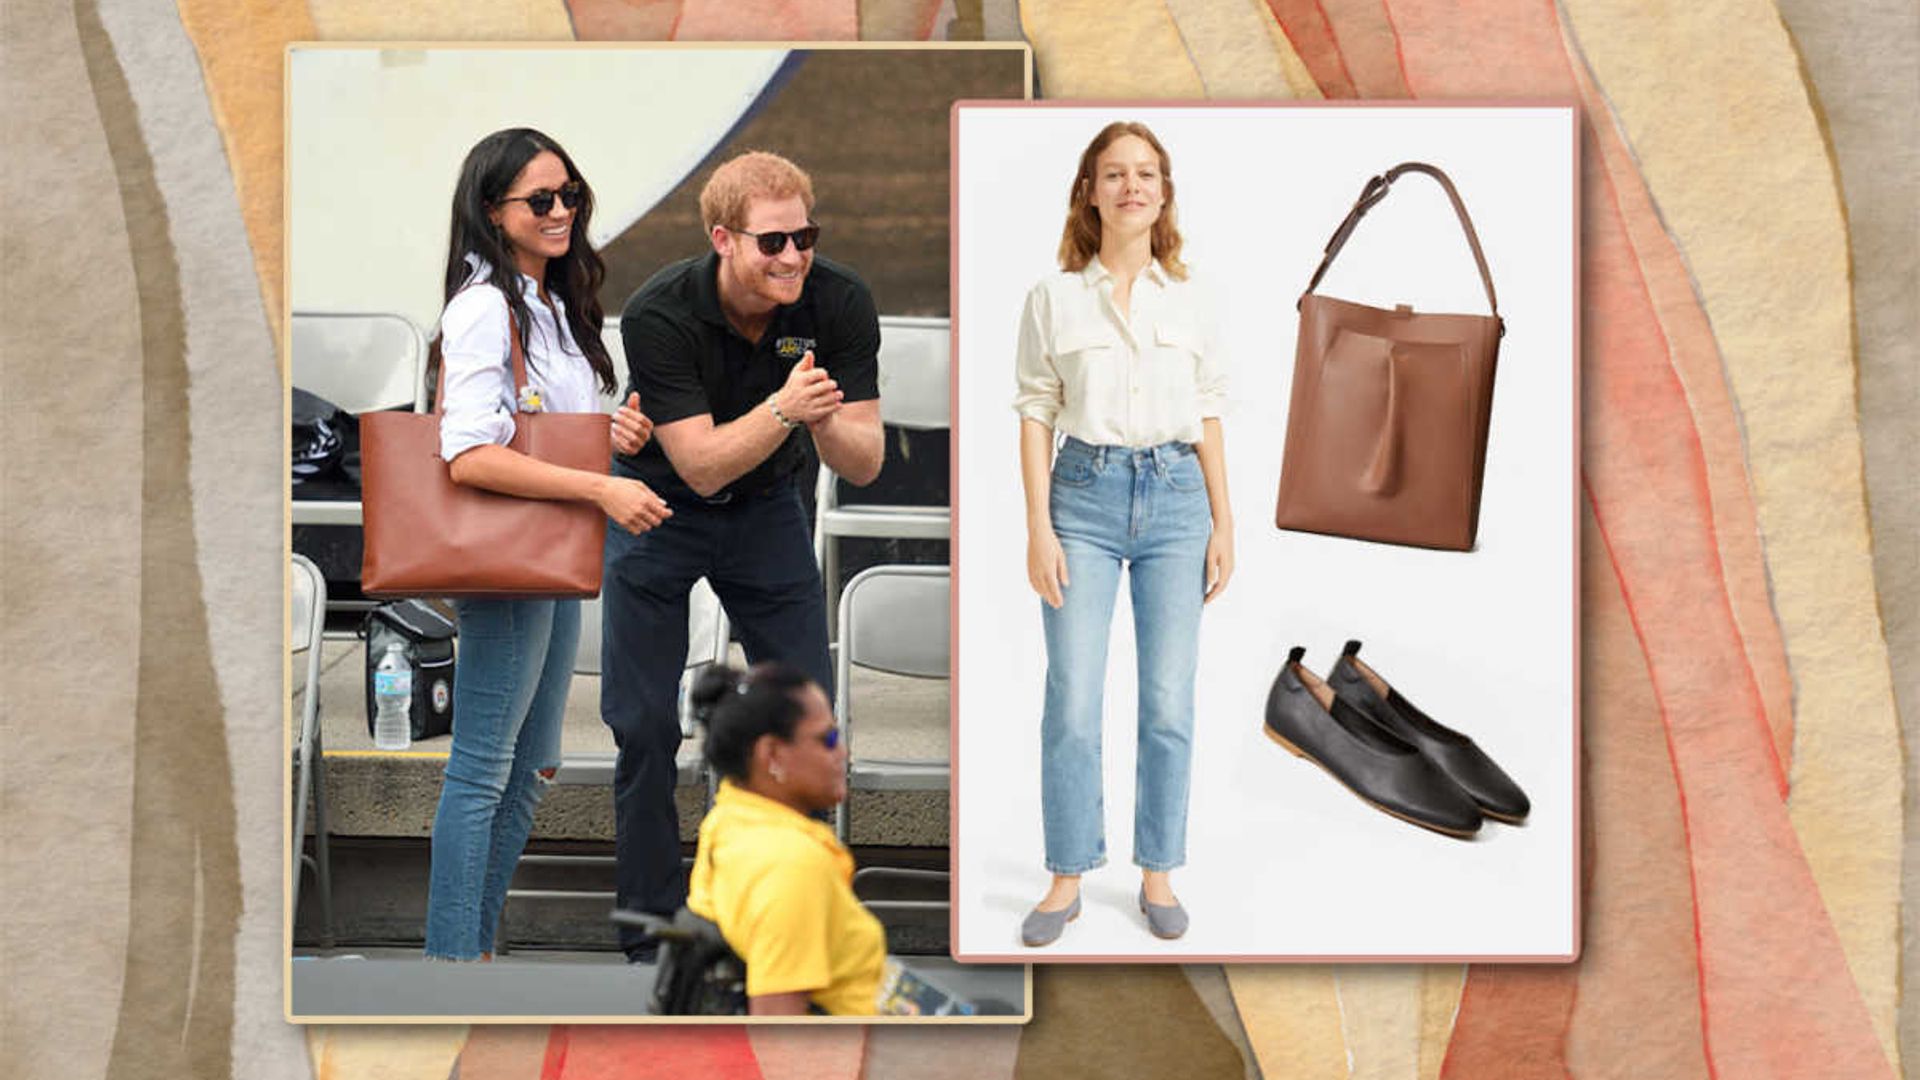 Angelina Jolie's Everlane Loafers Are Comfortable and Affordable